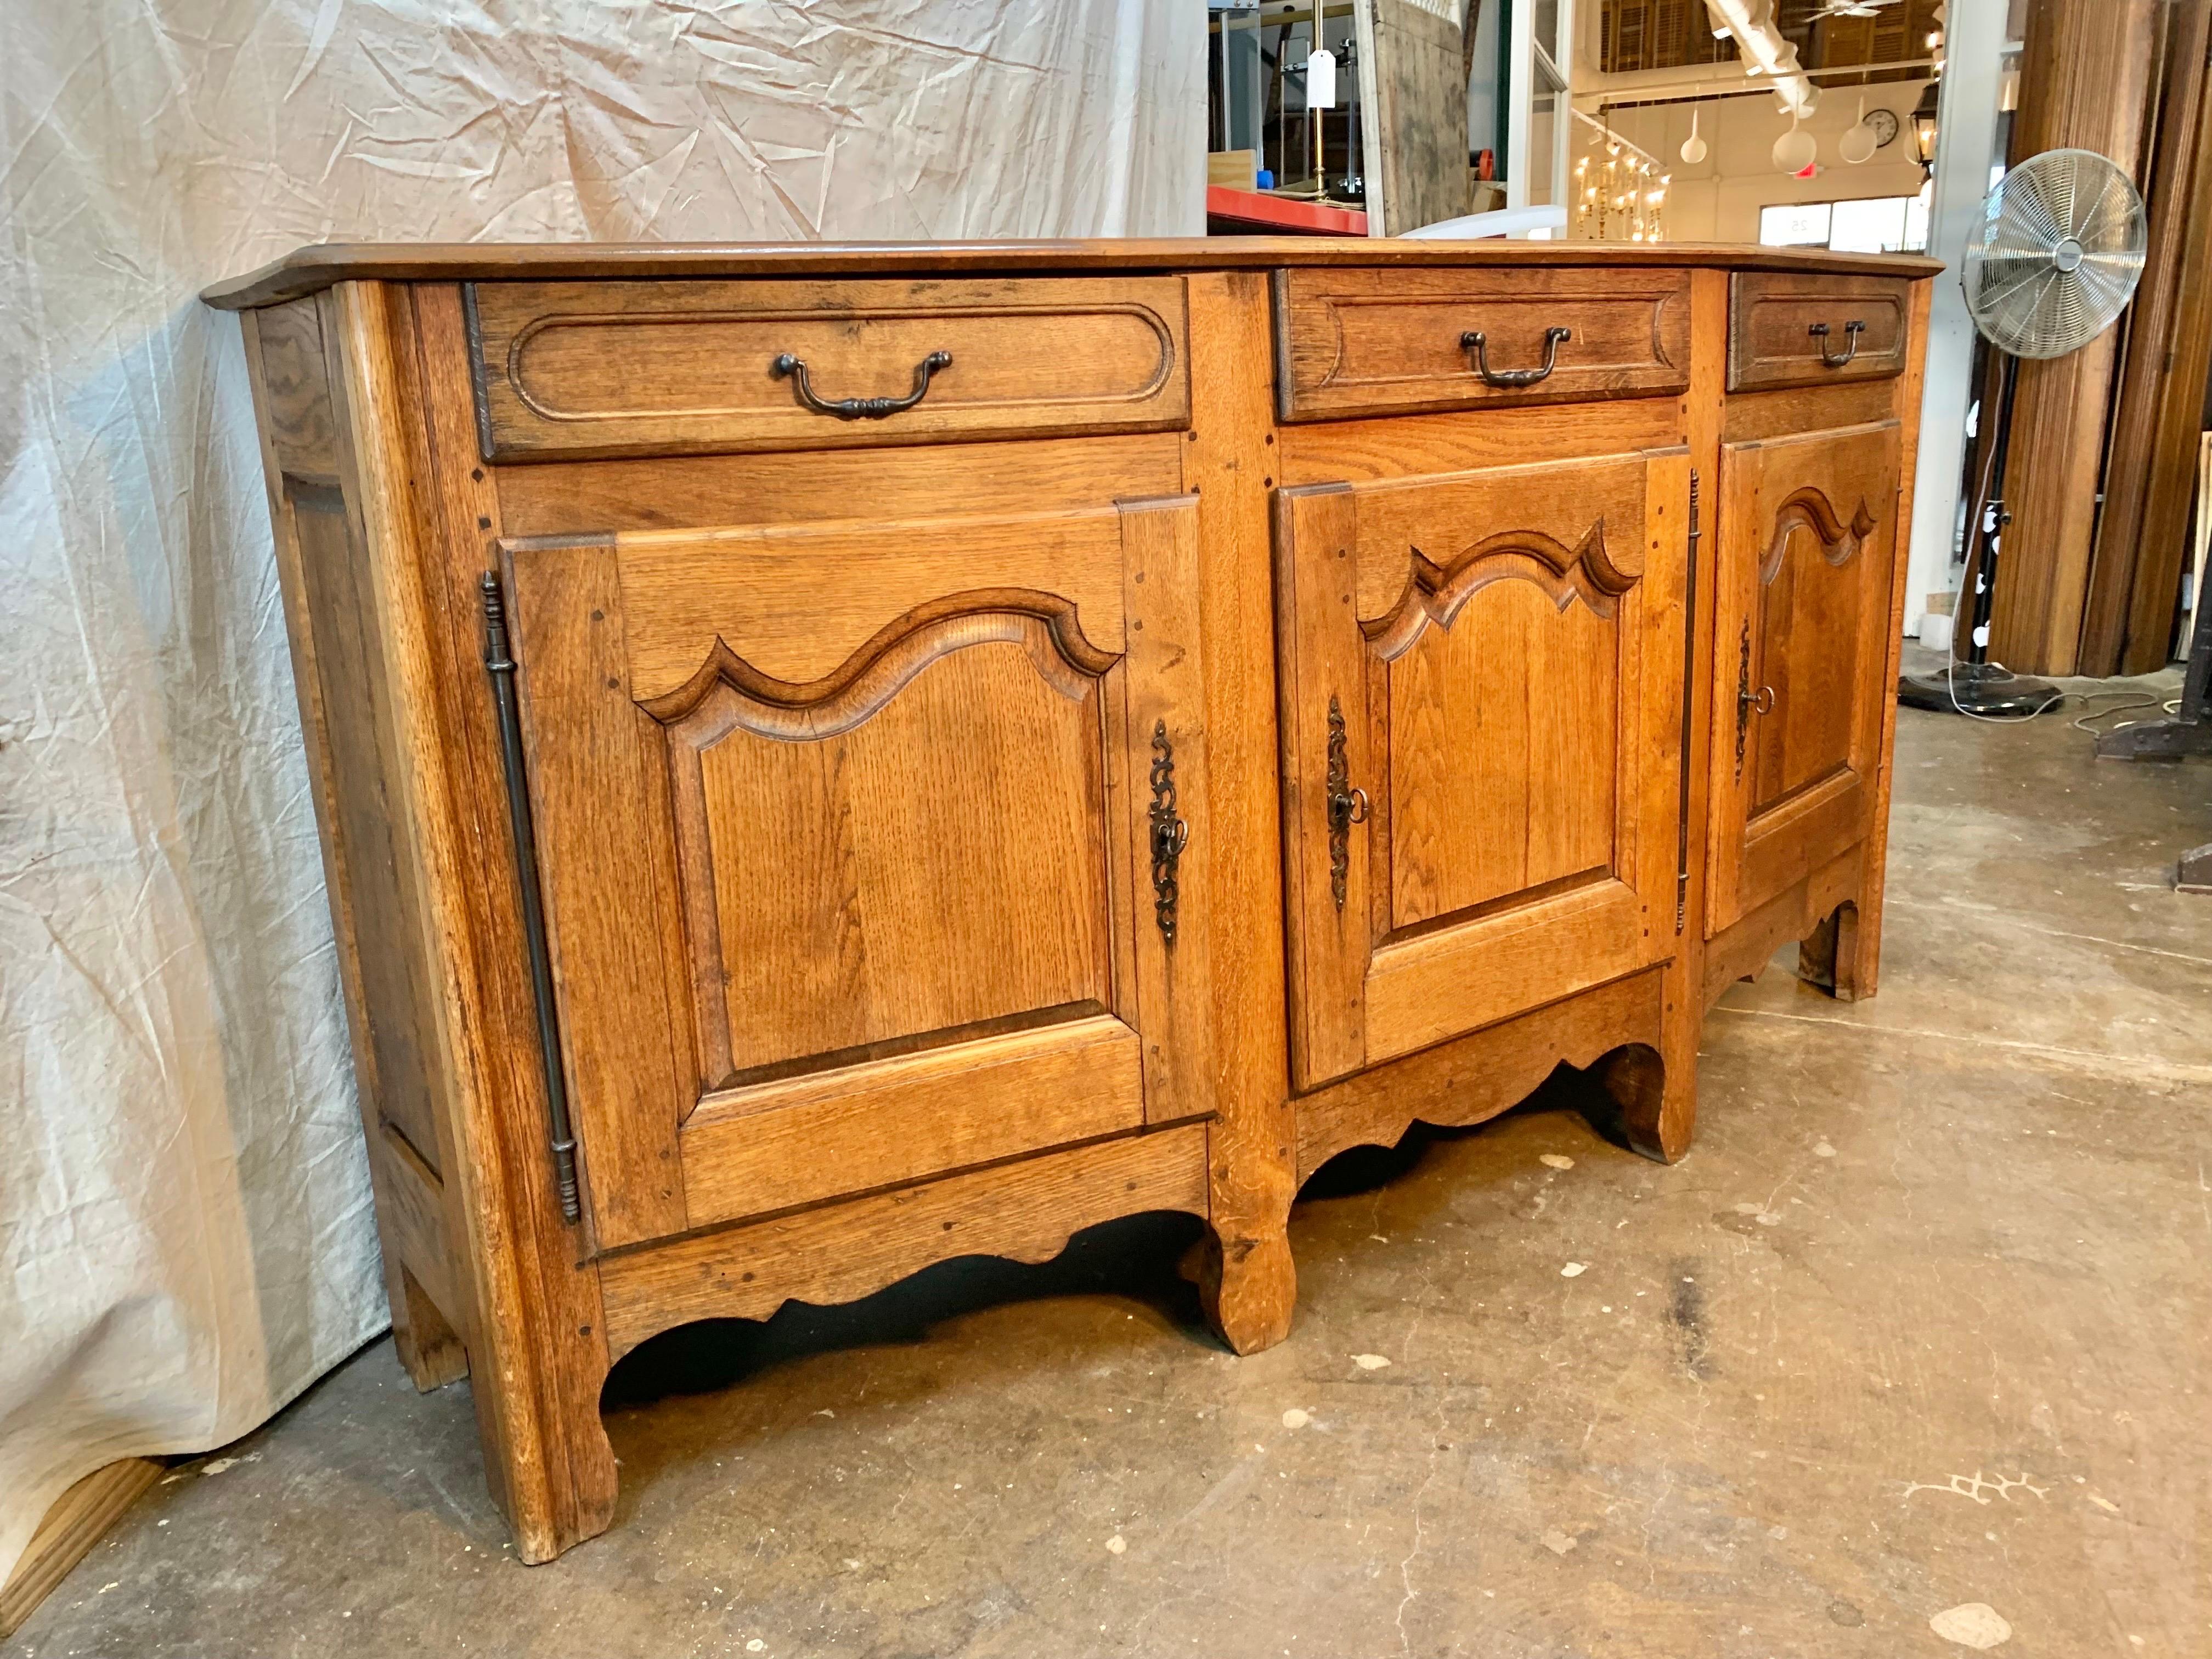 Found in the Burgundy region of France, this Early 1900s French Provincial Buffet or Sideboard was crafted by French artisans from old growth oak. Crafted with a unique angled front, the piece features a hand wood pegged top resting above three